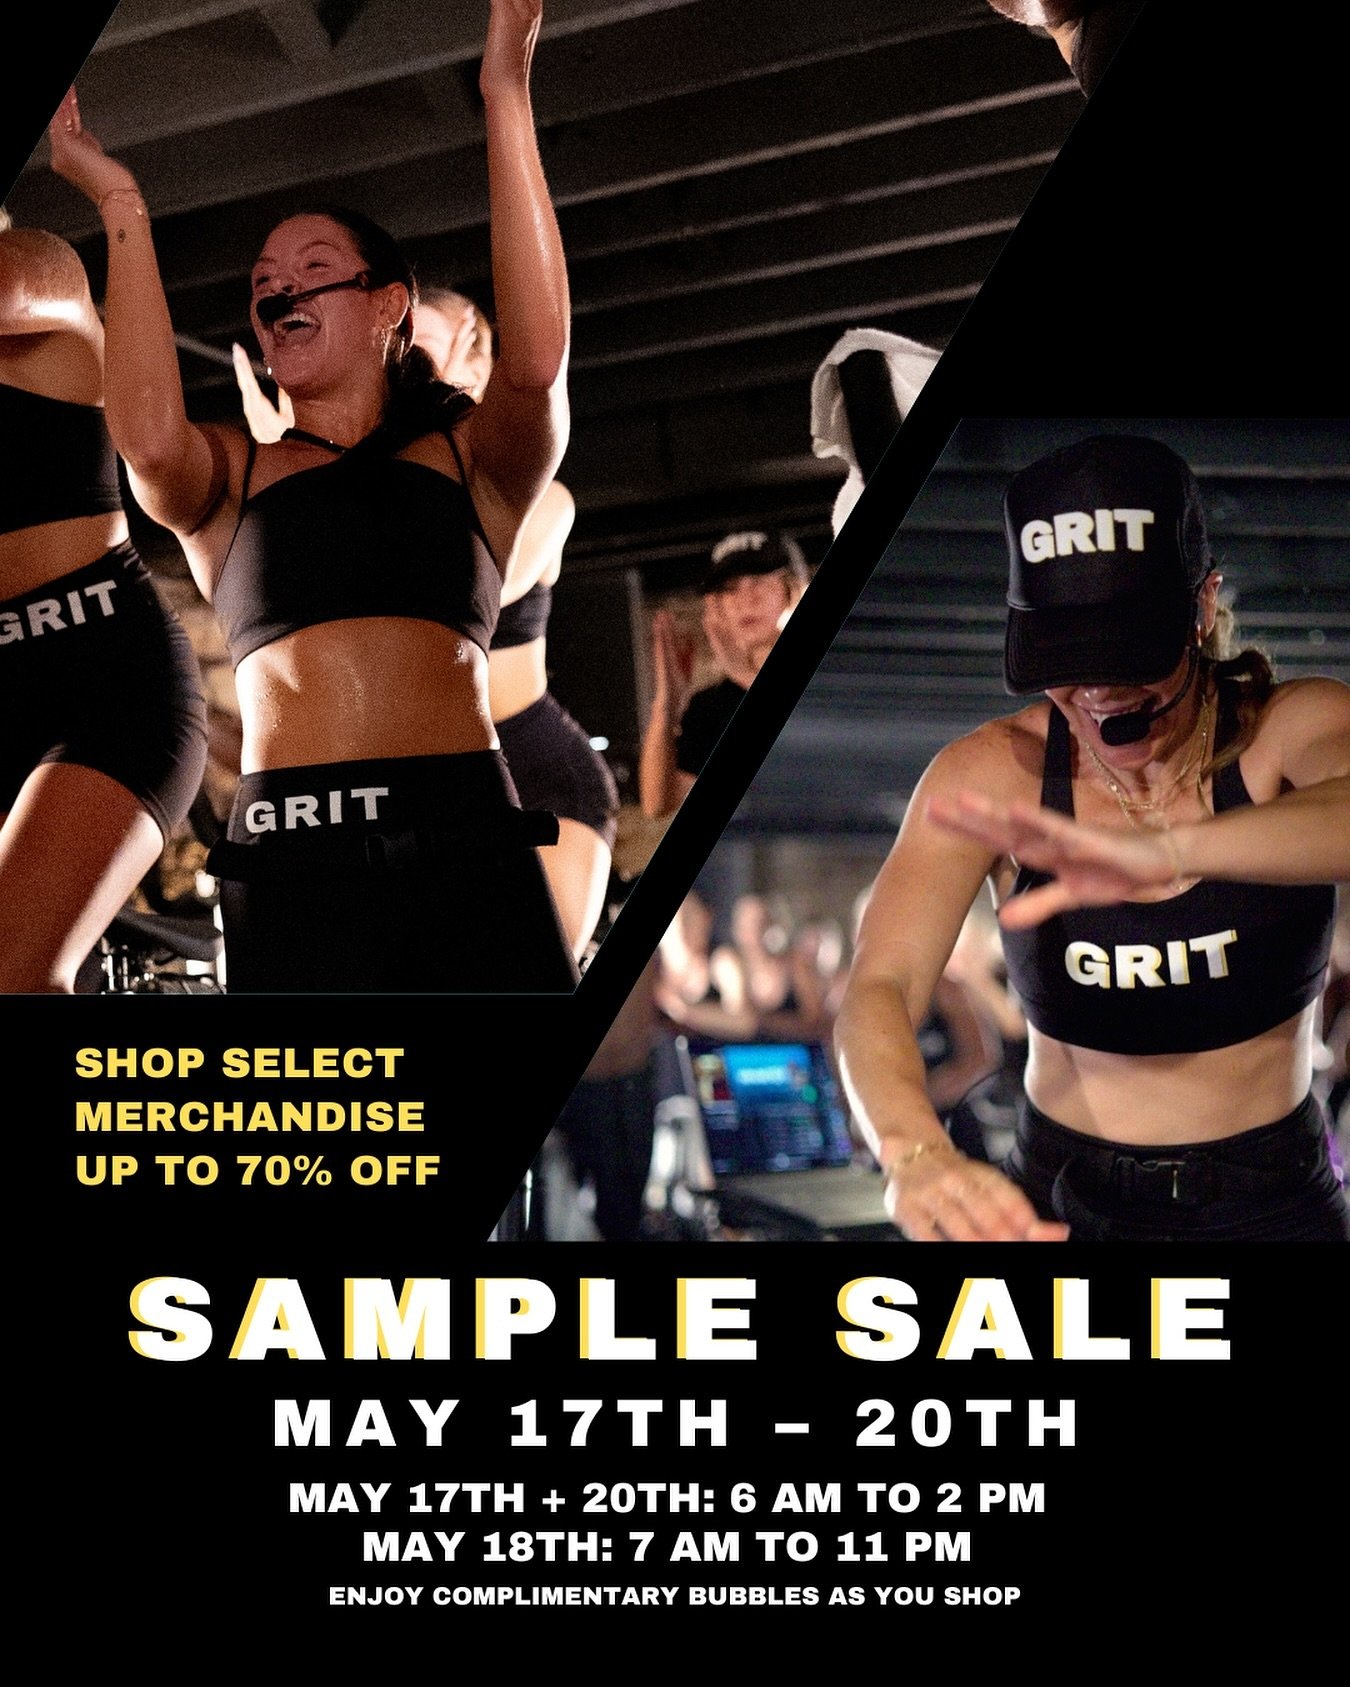 SAVE UP TO 70% OFF MERCH THIS WEEKEND 🚨

Join us for our first Grit sample sale featuring unreleased designs, old and new merch discounted by up to 70%, and more. 

Jump into a class, then hang out and shop as you enjoy complimentary bubbles or LMNT